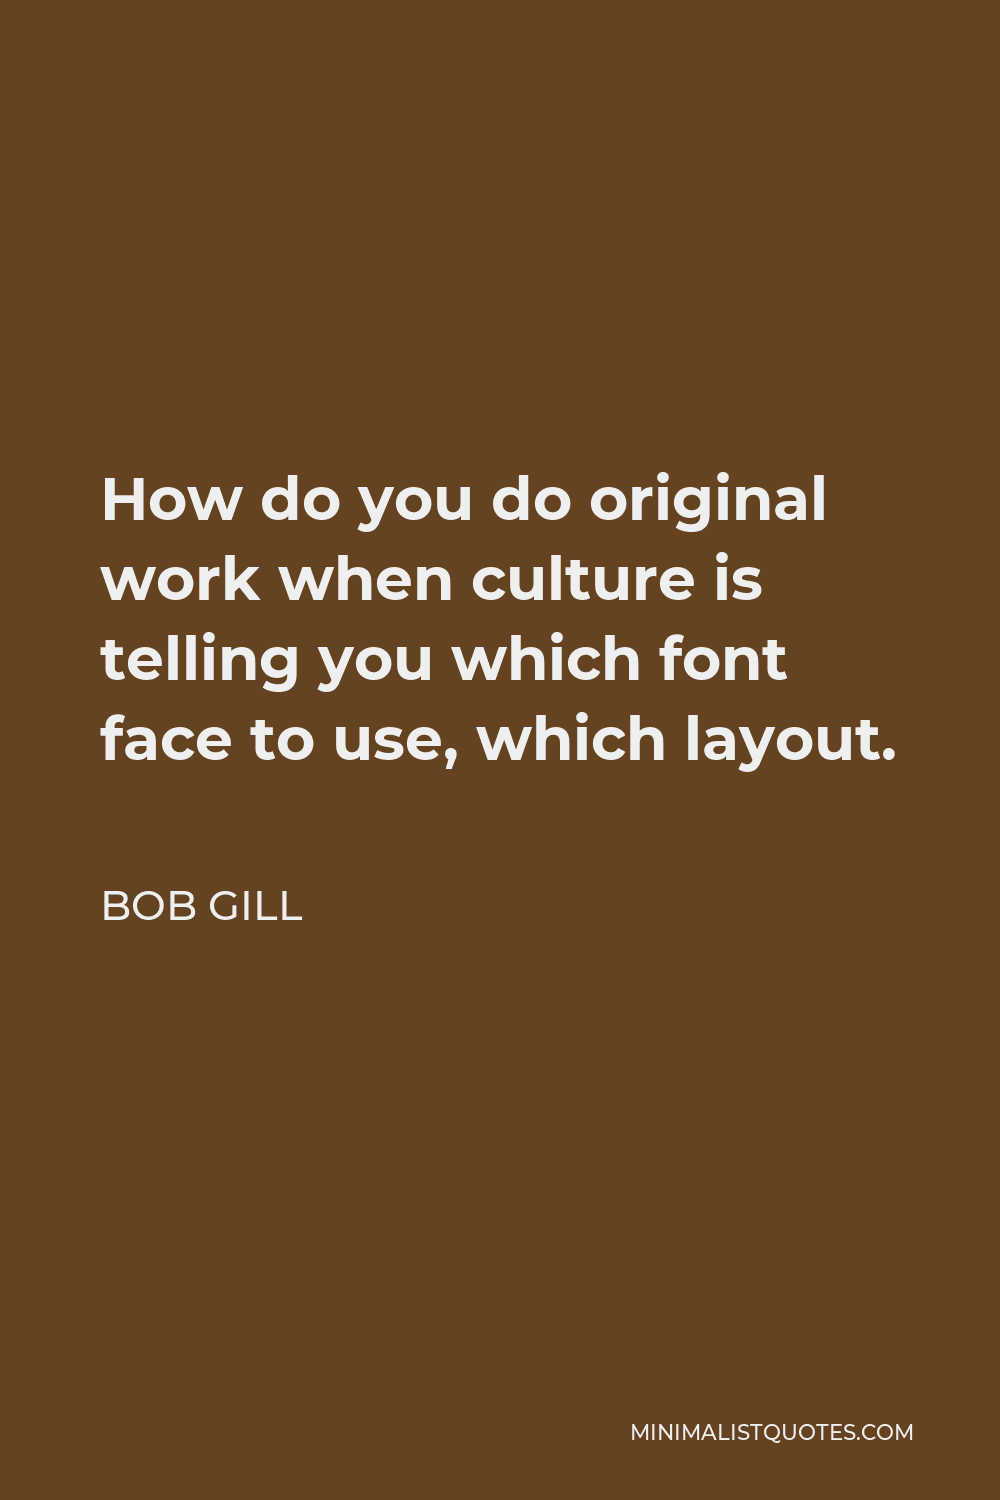 Bob Gill Quote - How do you do original work when culture is telling you which font face to use, which layout.